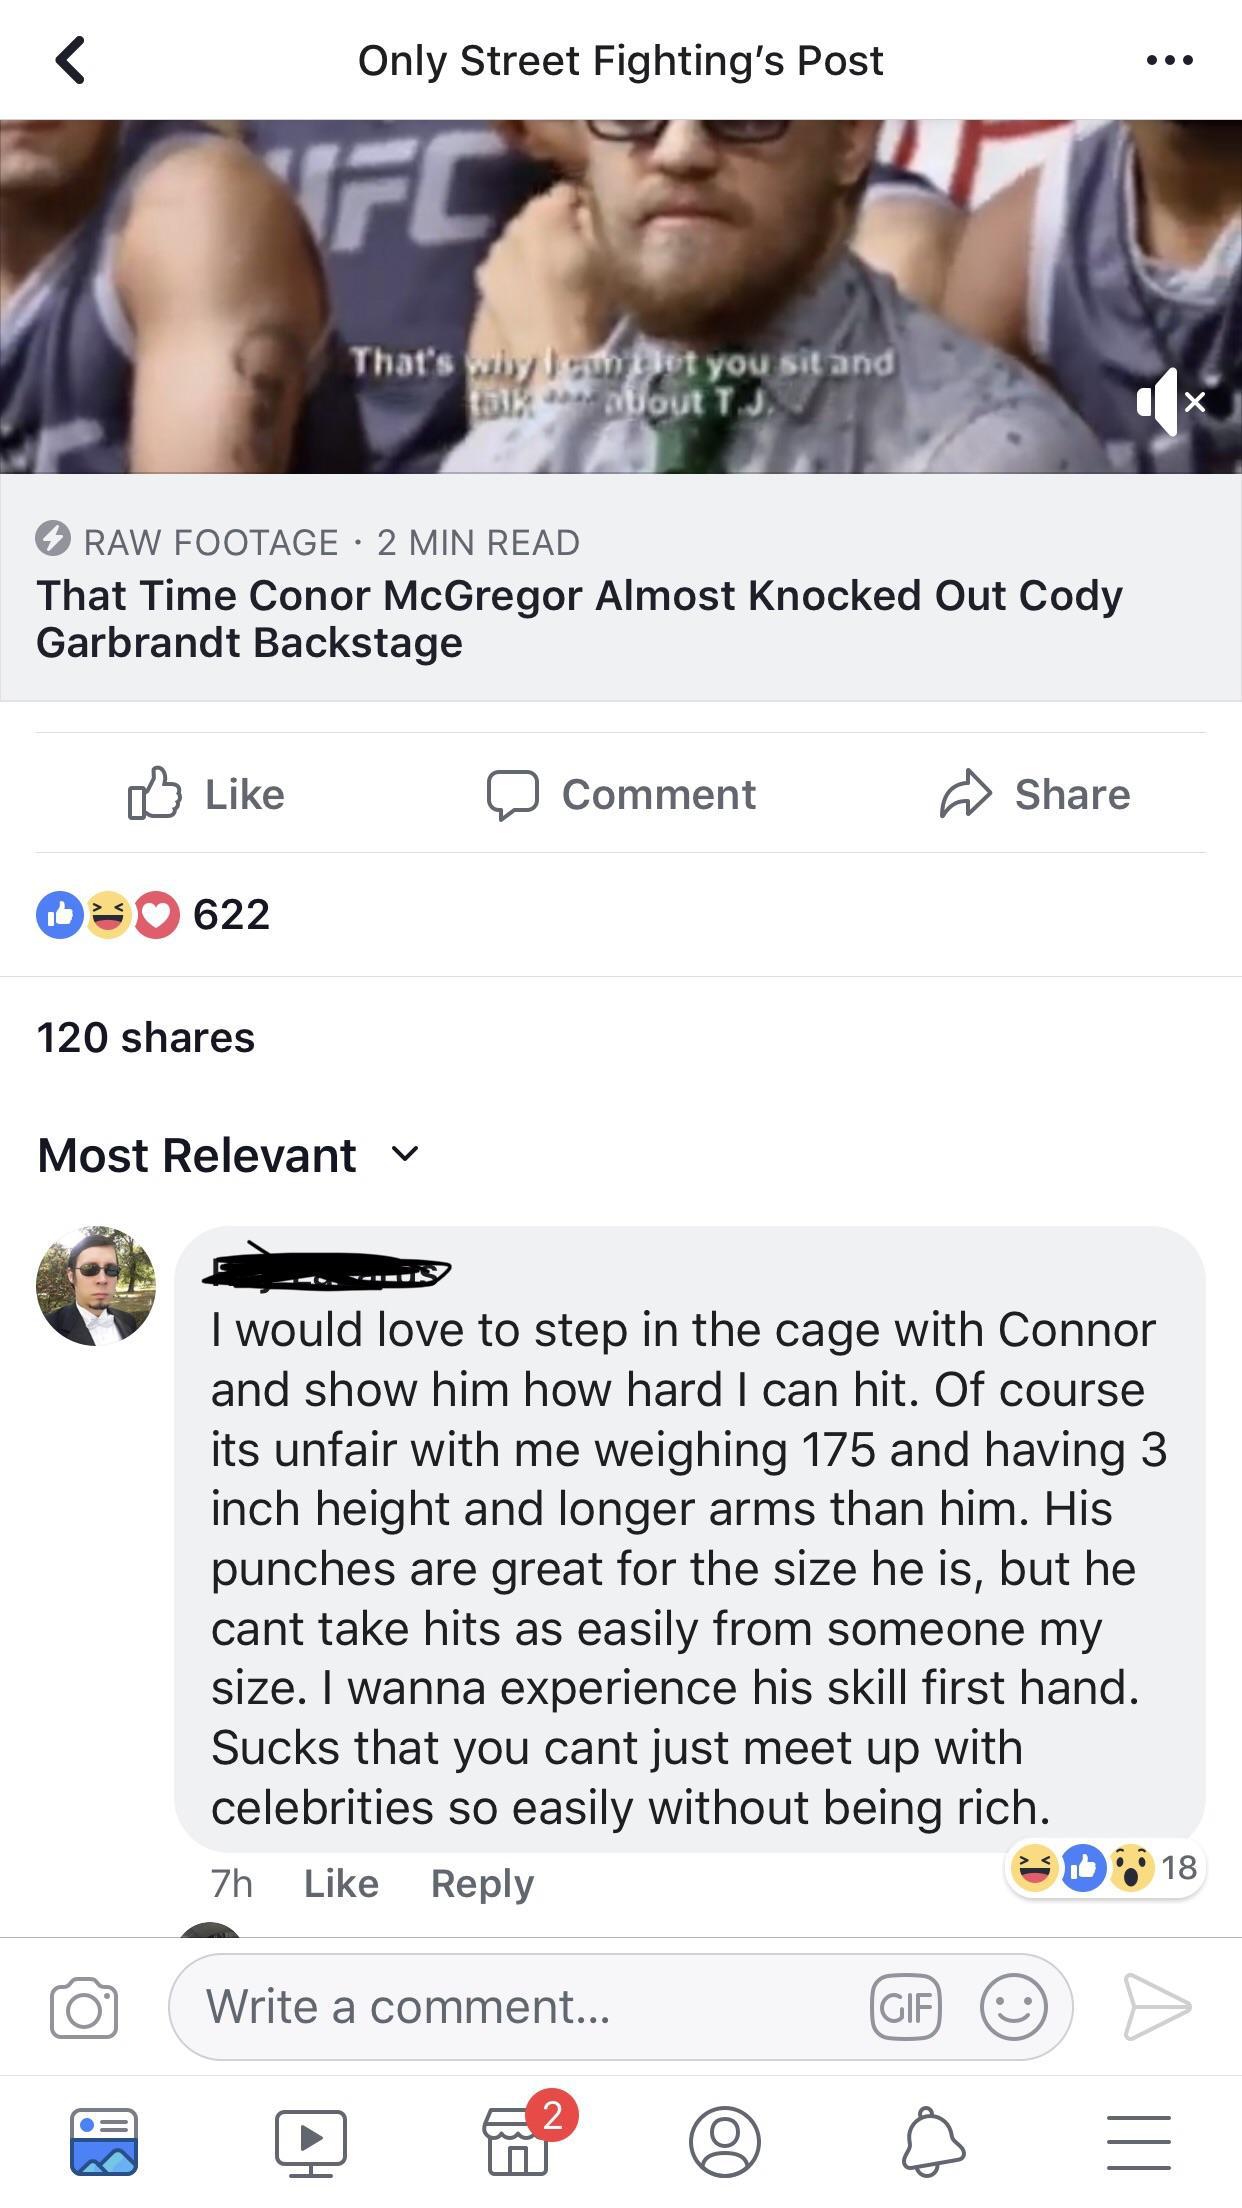 screenshot - Only Street Fighting's Post That's why o talk a ut you sit and bout T.J. Raw Footage 2 Min Read That Time Conor McGregor Almost knocked Out Cody Garbrandt Backstage DComment @ 0 0 622 120 Most Relevant v I would love to step in the cage with 